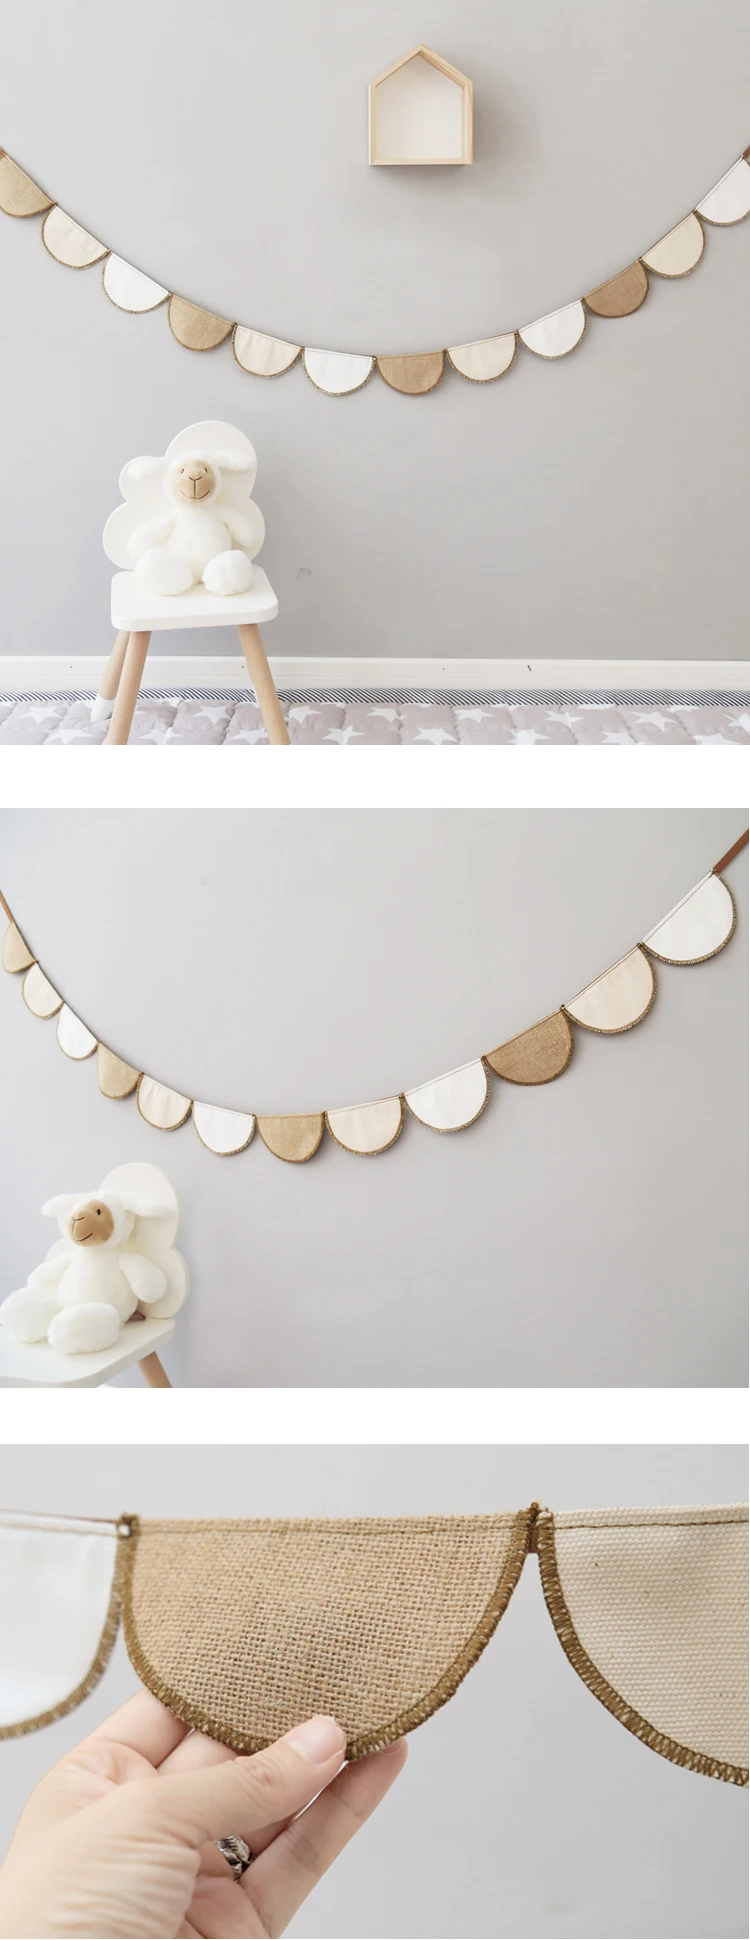 Nordic-Style-Hanging-Decorations-Cotton-Linen-Flower-Kids-Chambre-Enfant-Girl-Boy-Room-Decoration-Home-Party-Wedding-Wall-Decor-011